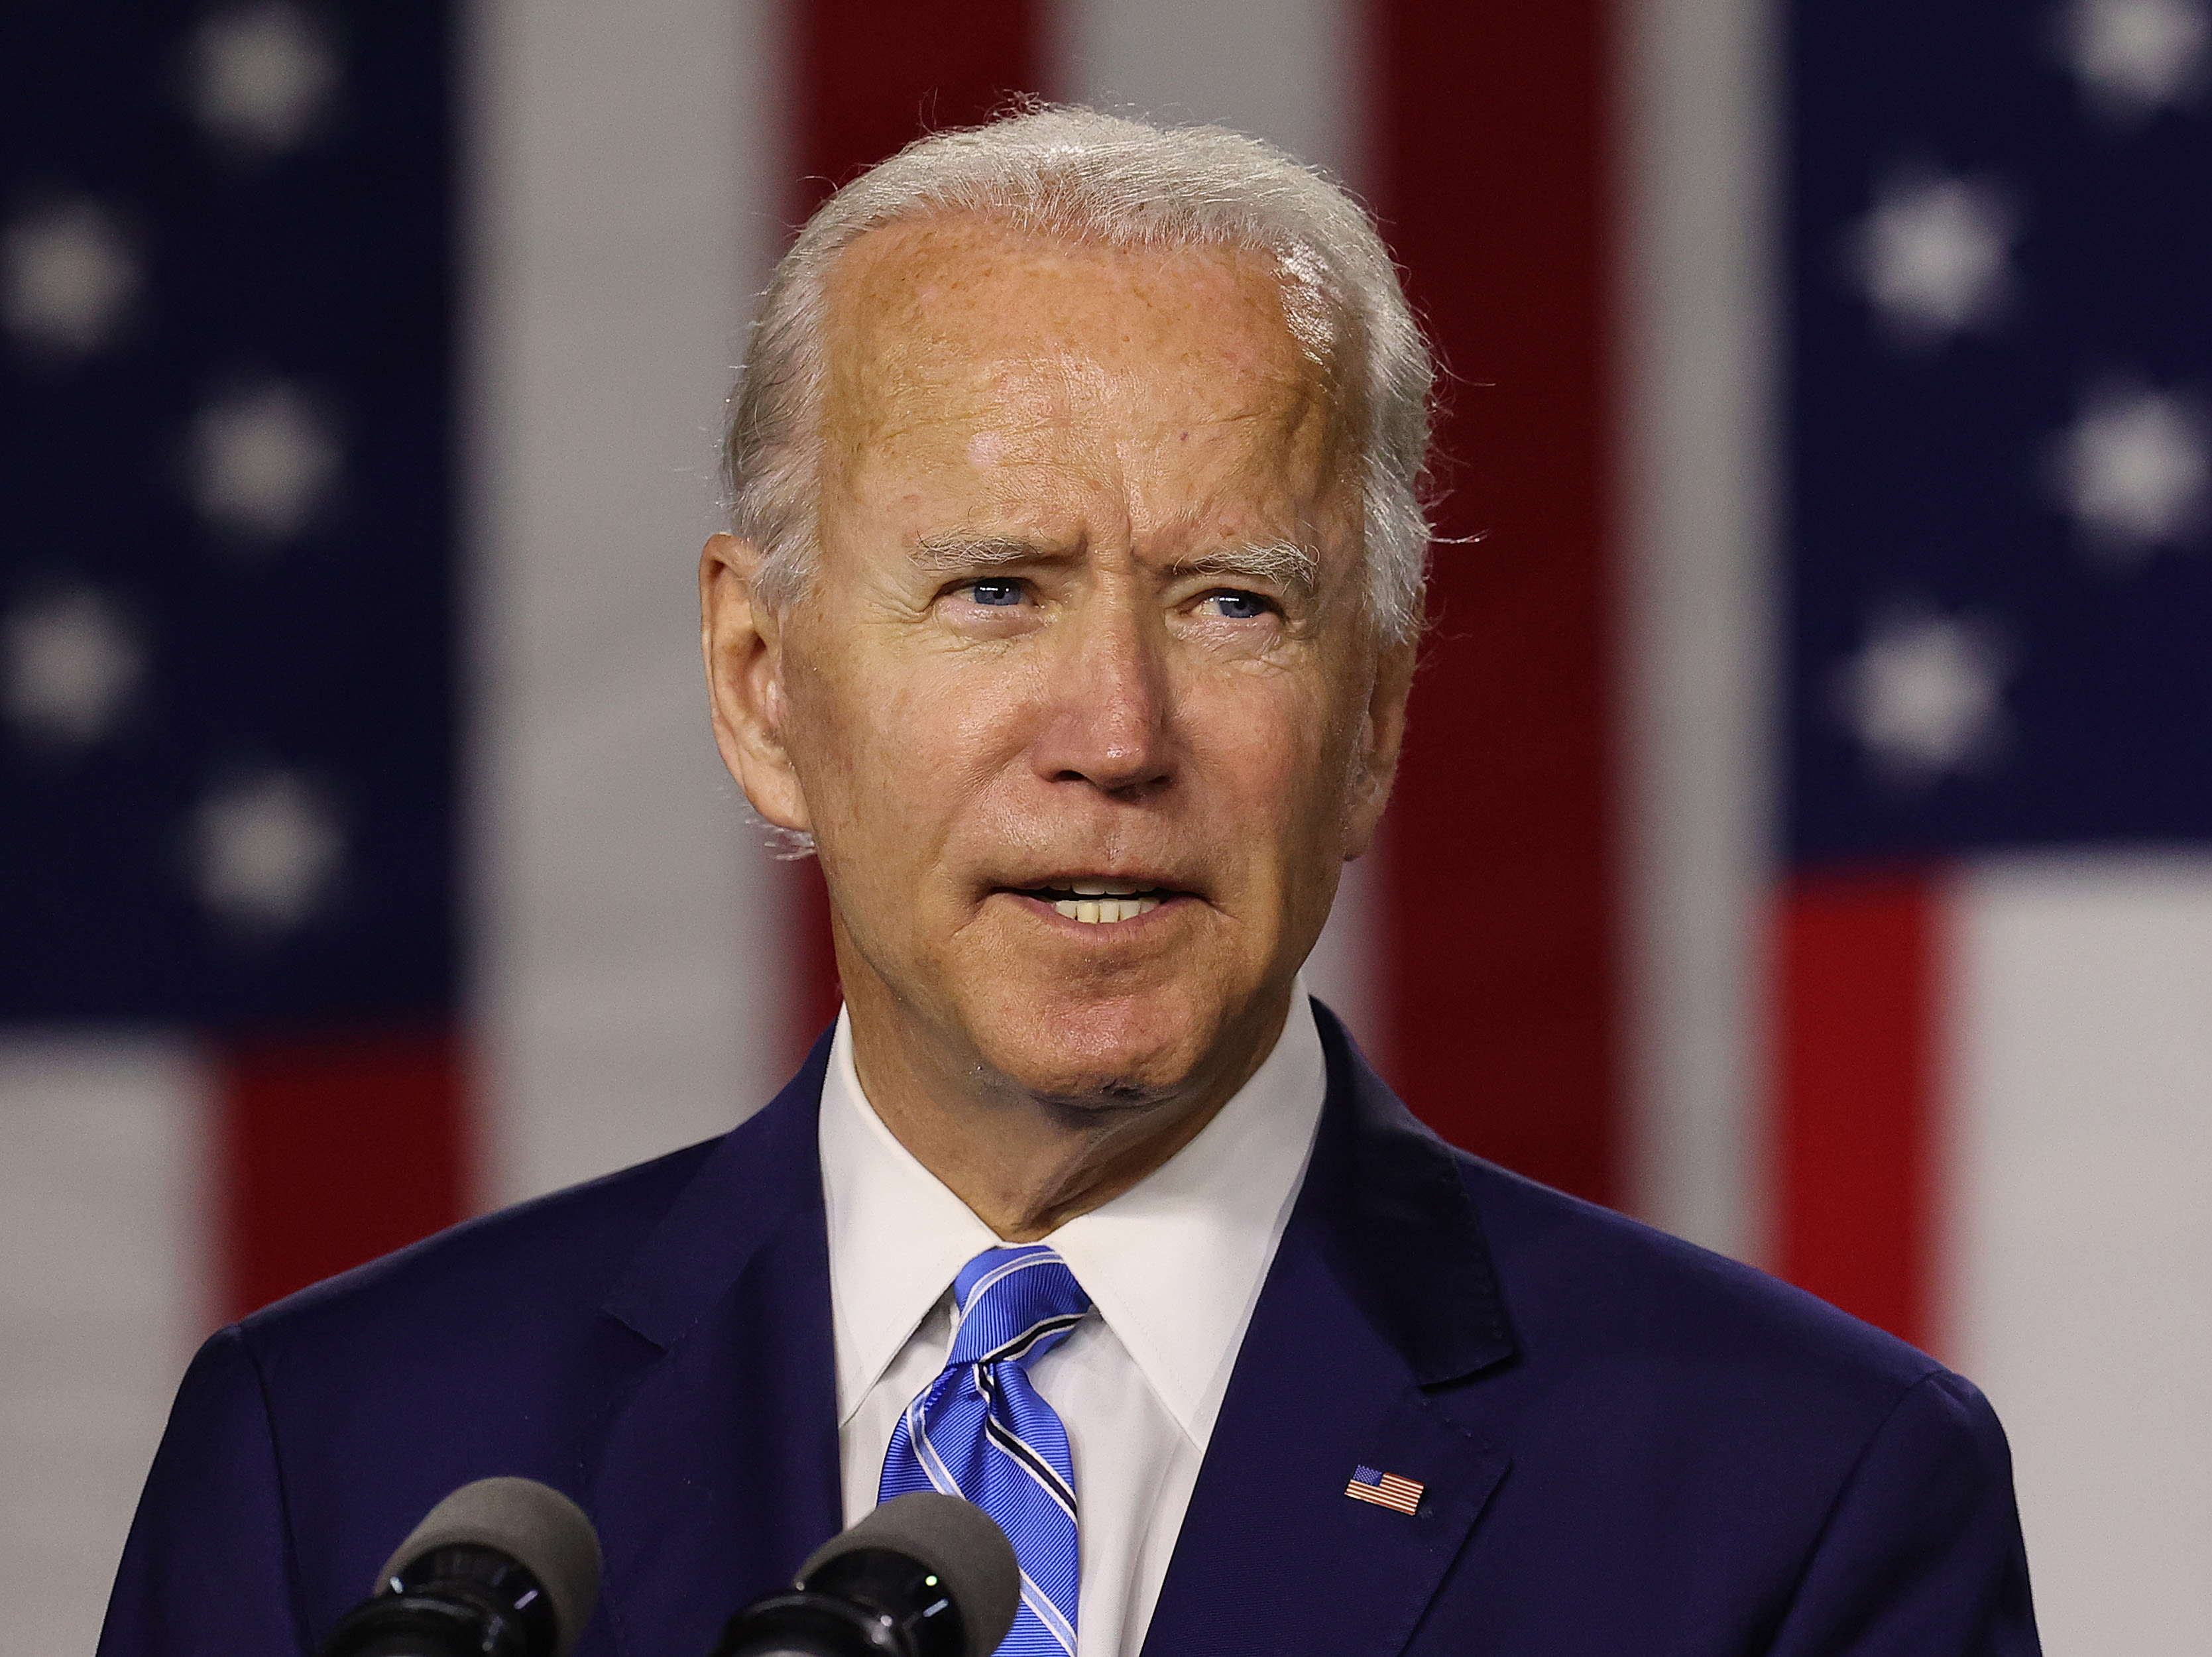 Is Joe Biden ready to drop out of election? Six quotes that say he may be